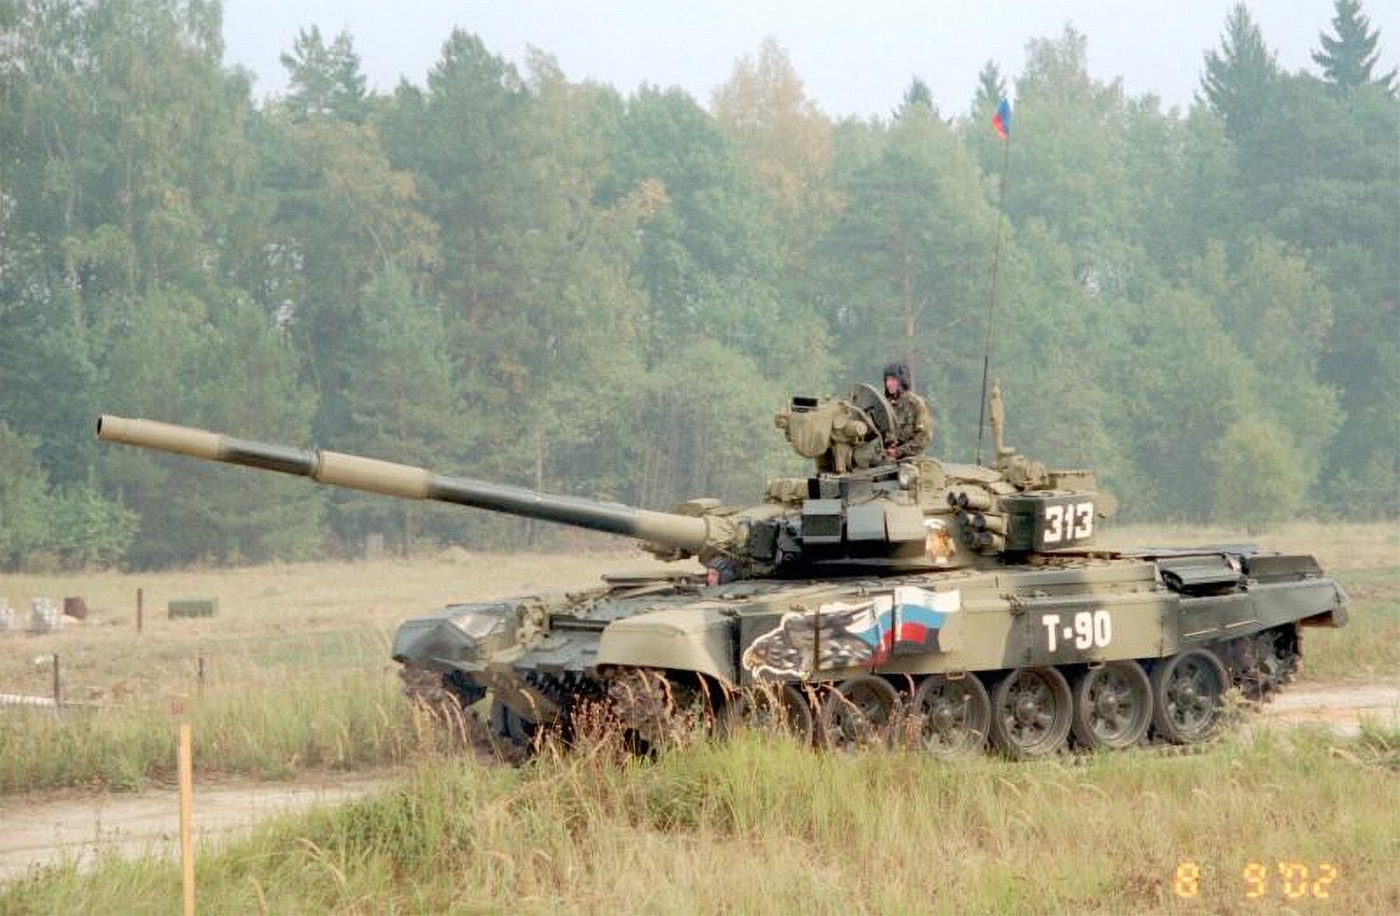 This Russian T-90 tank participates in a 2002 training exercise near Moscow.